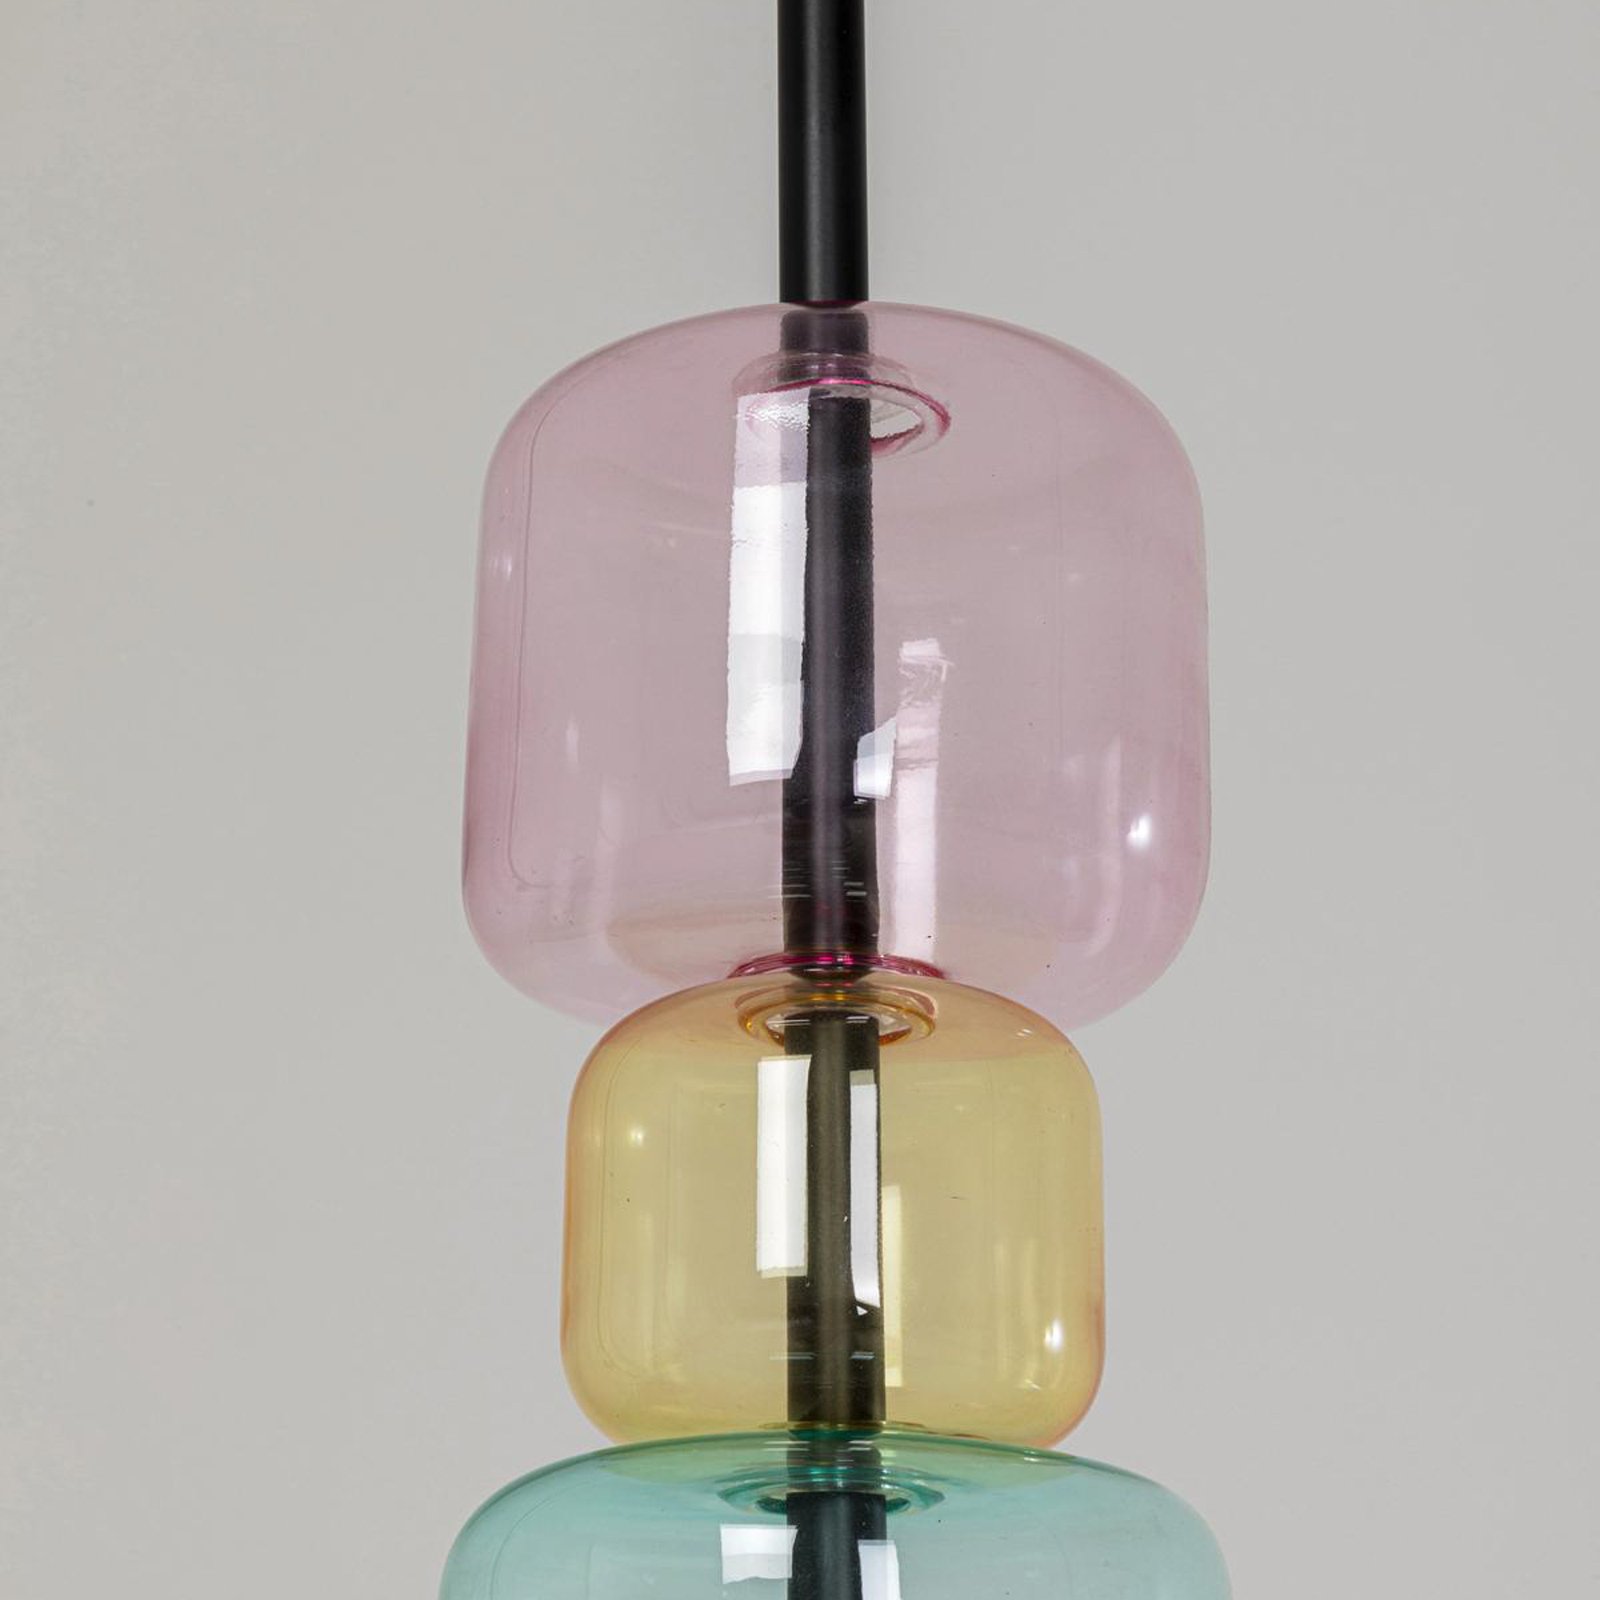 KARE Hanging light Candy Bar Colore, multicoloured glass, 1-bulb